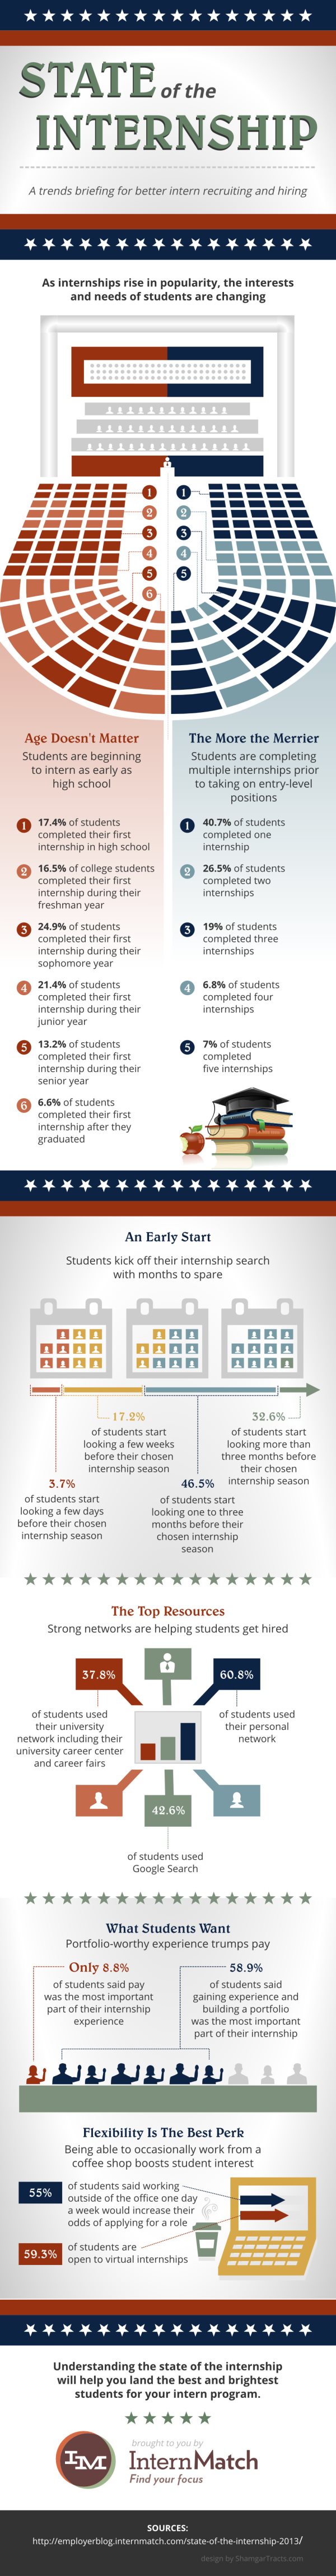 State-of-the-Internship Infographic